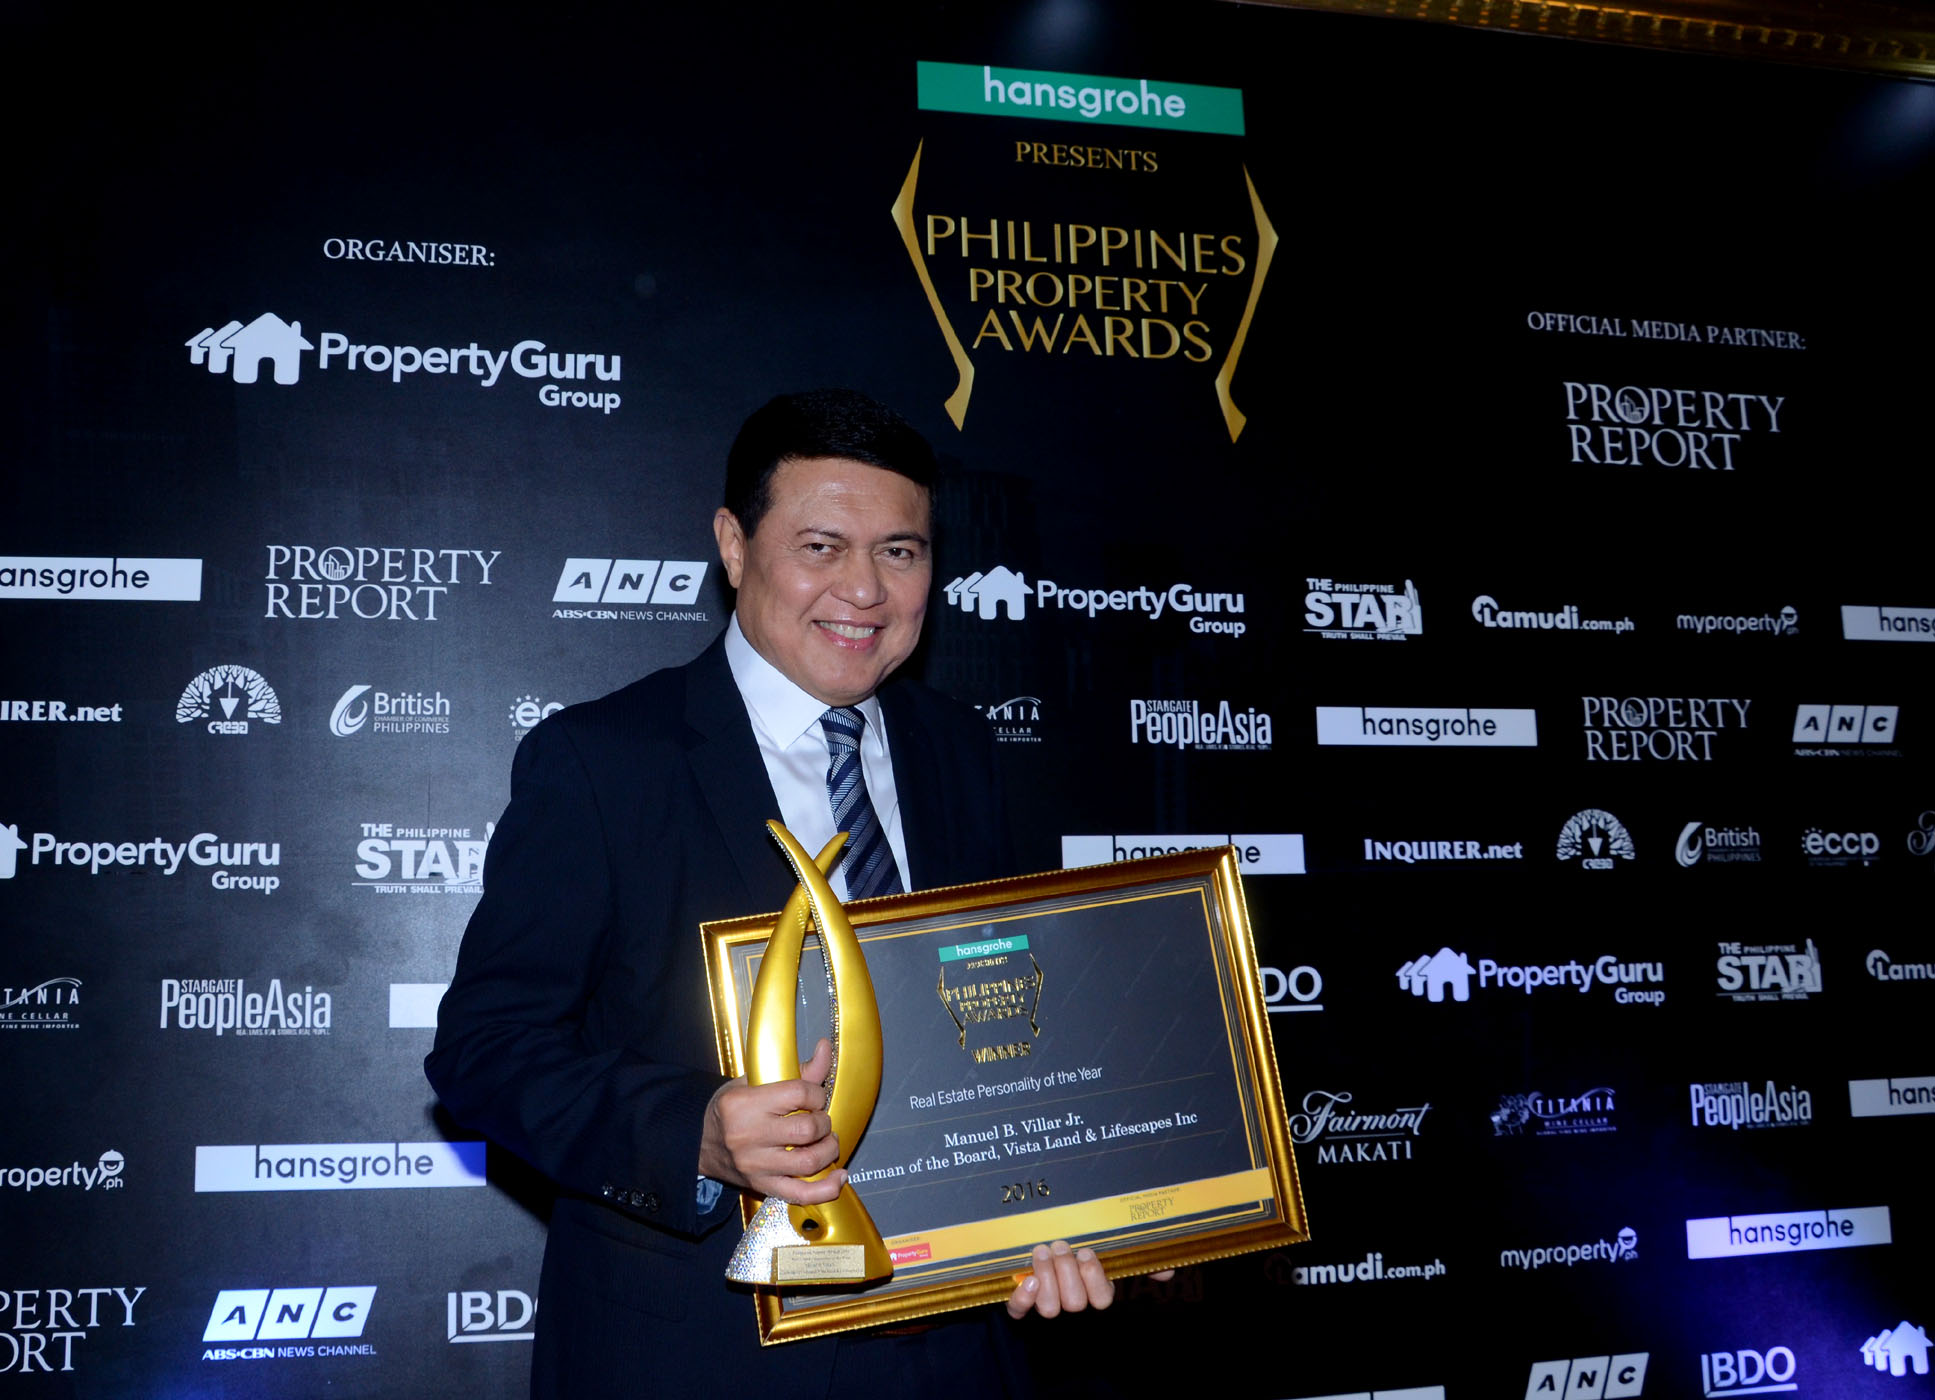 PHILIPPINES PROPERTY AWARDS Real Estate Personality of the Year 2